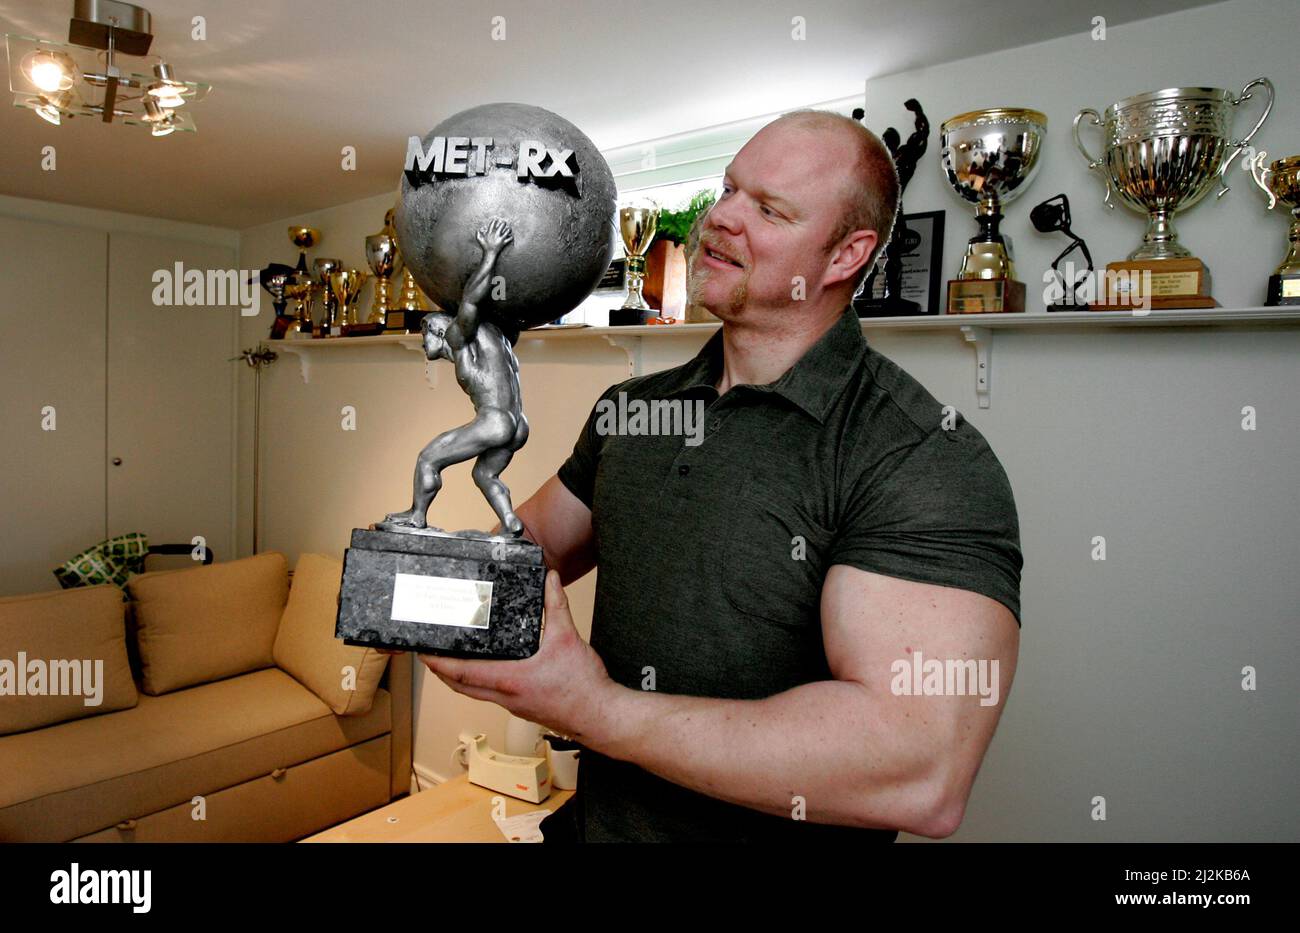 Magnus Samuelsson, actor and the World's Strongest Man. Stock Photo